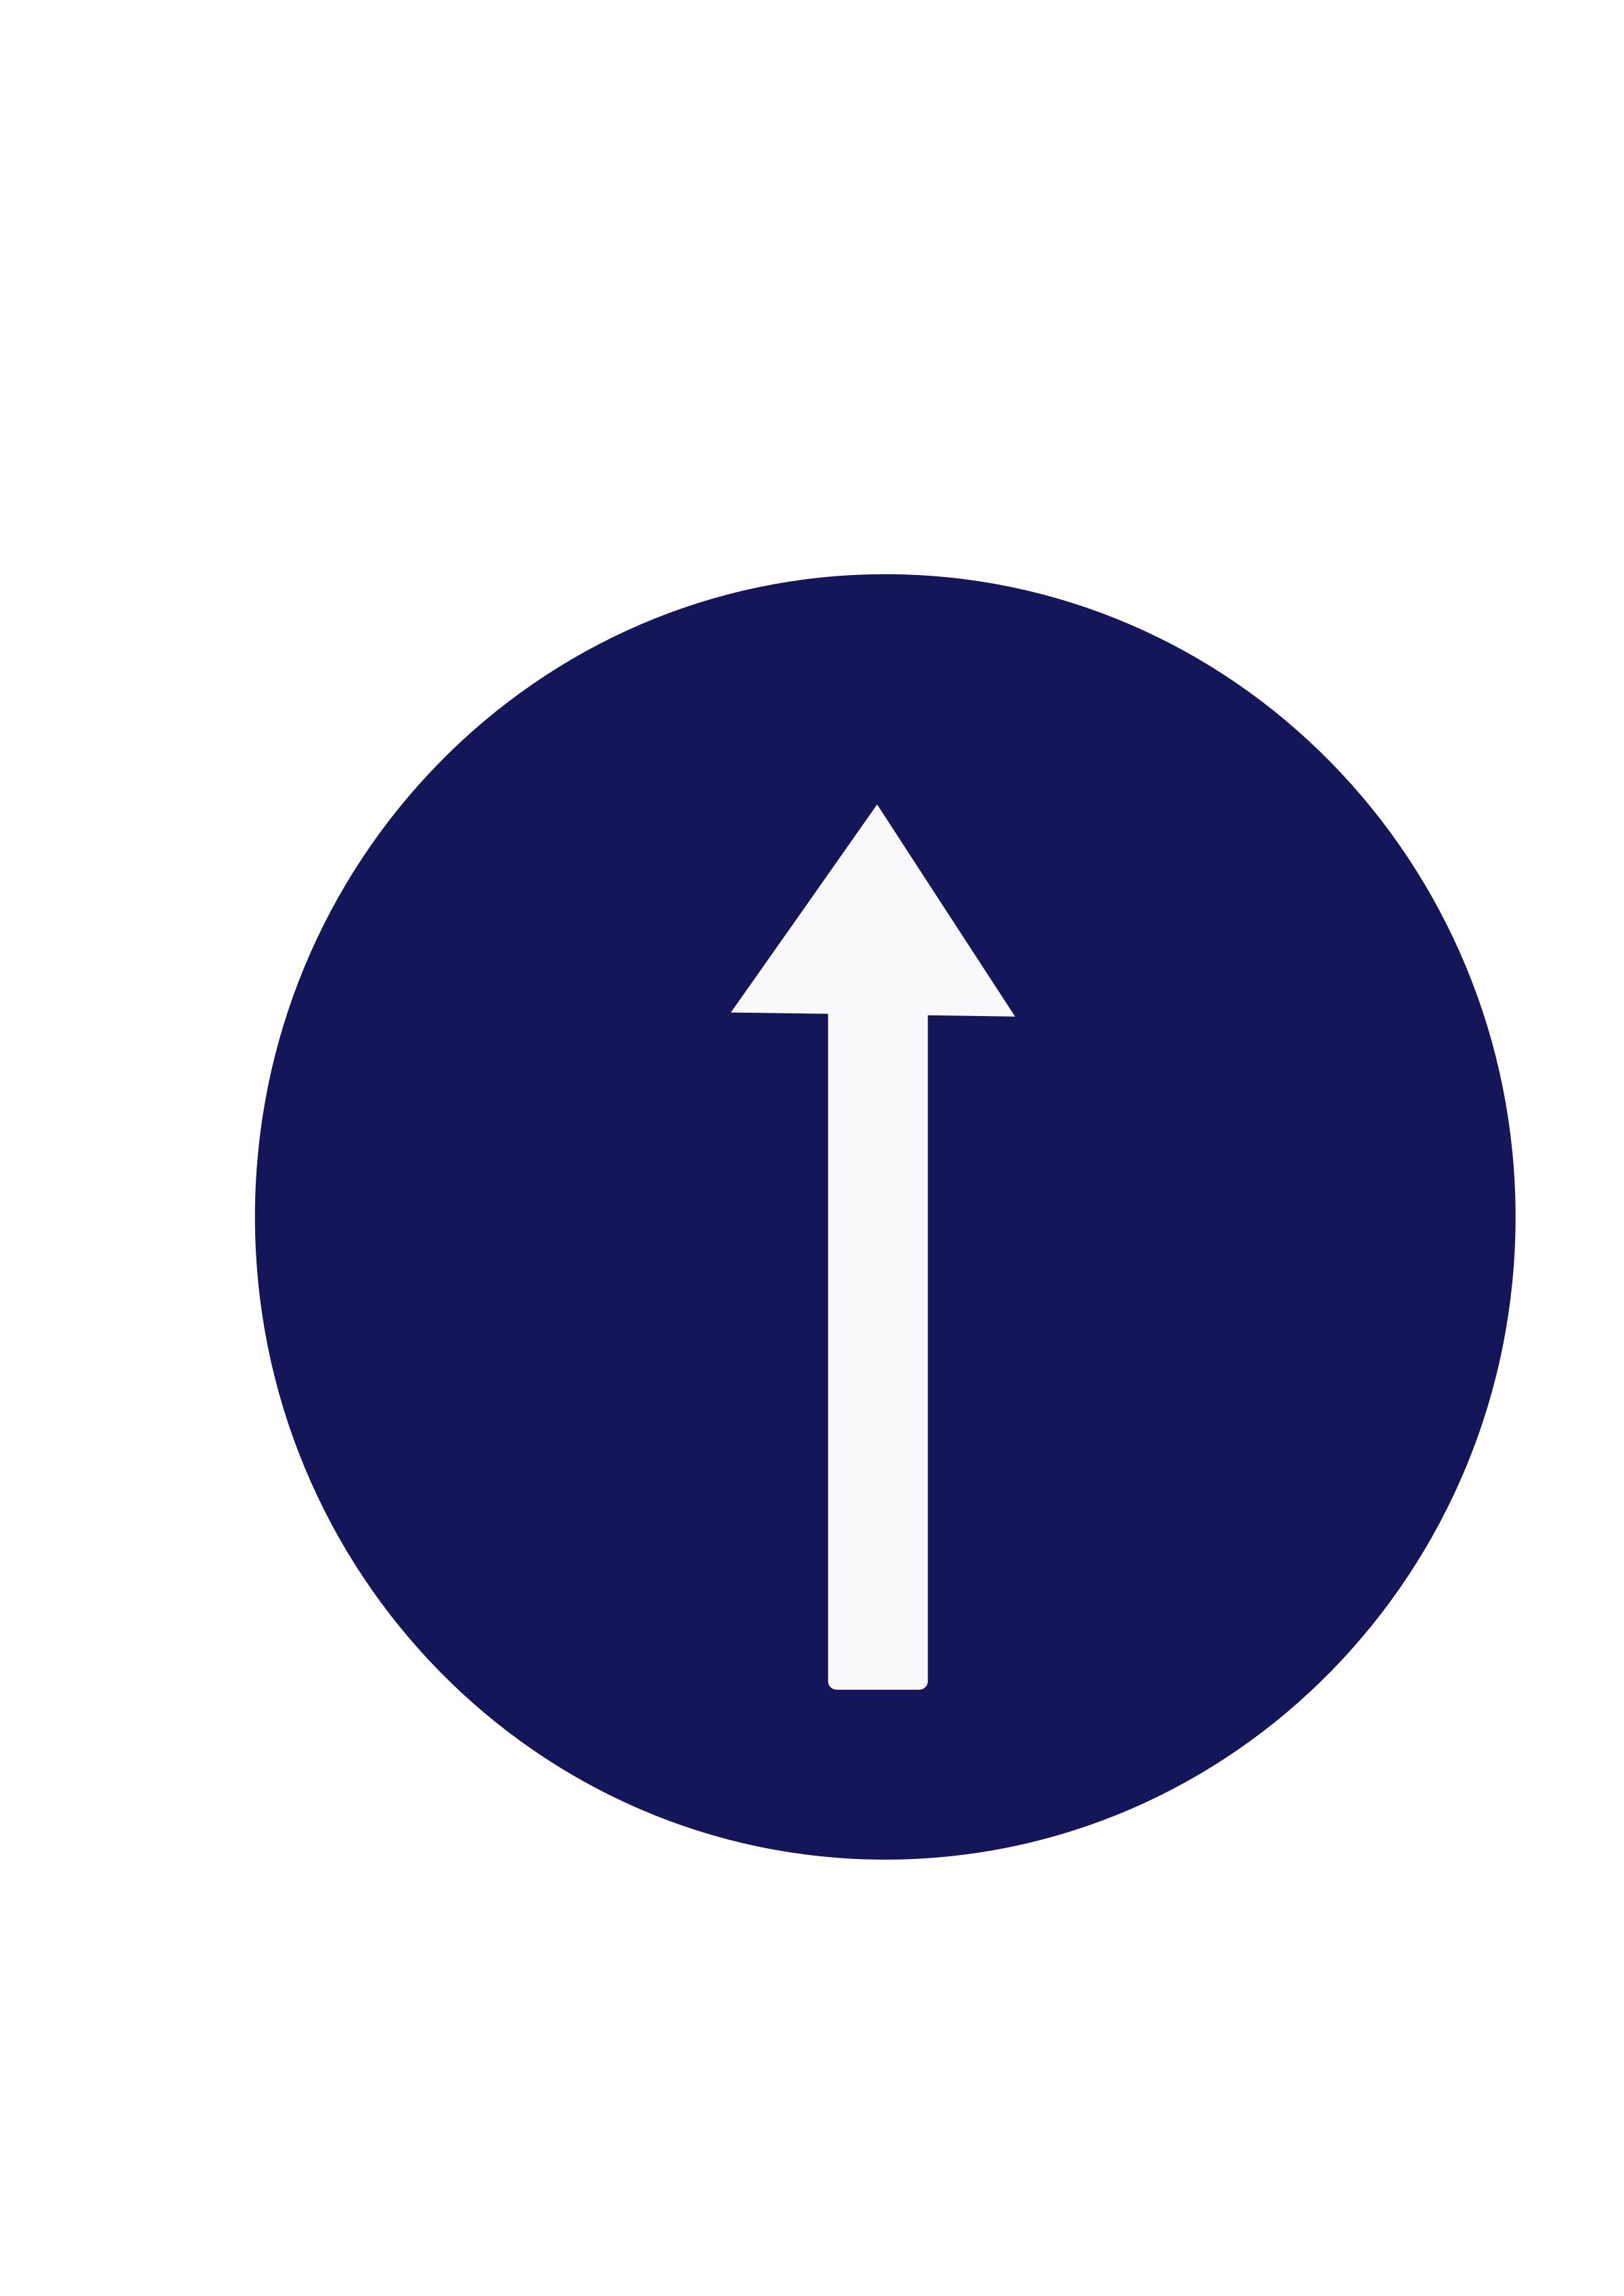 Indian road sign - Compulsory ahead only png